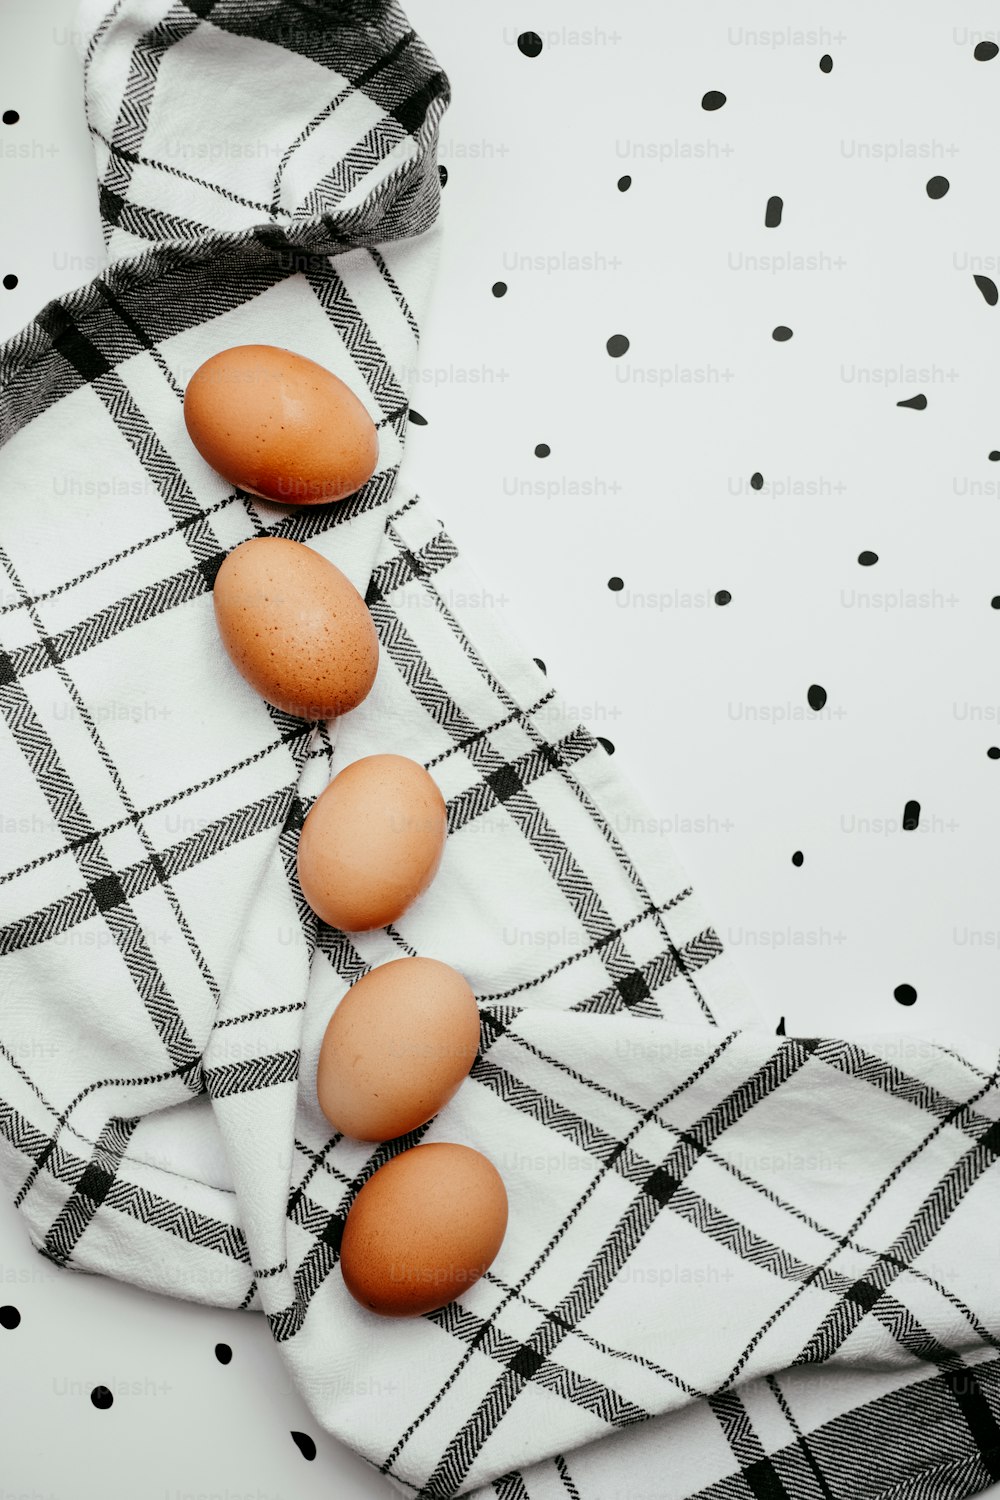 three eggs are sitting on a towel on a table